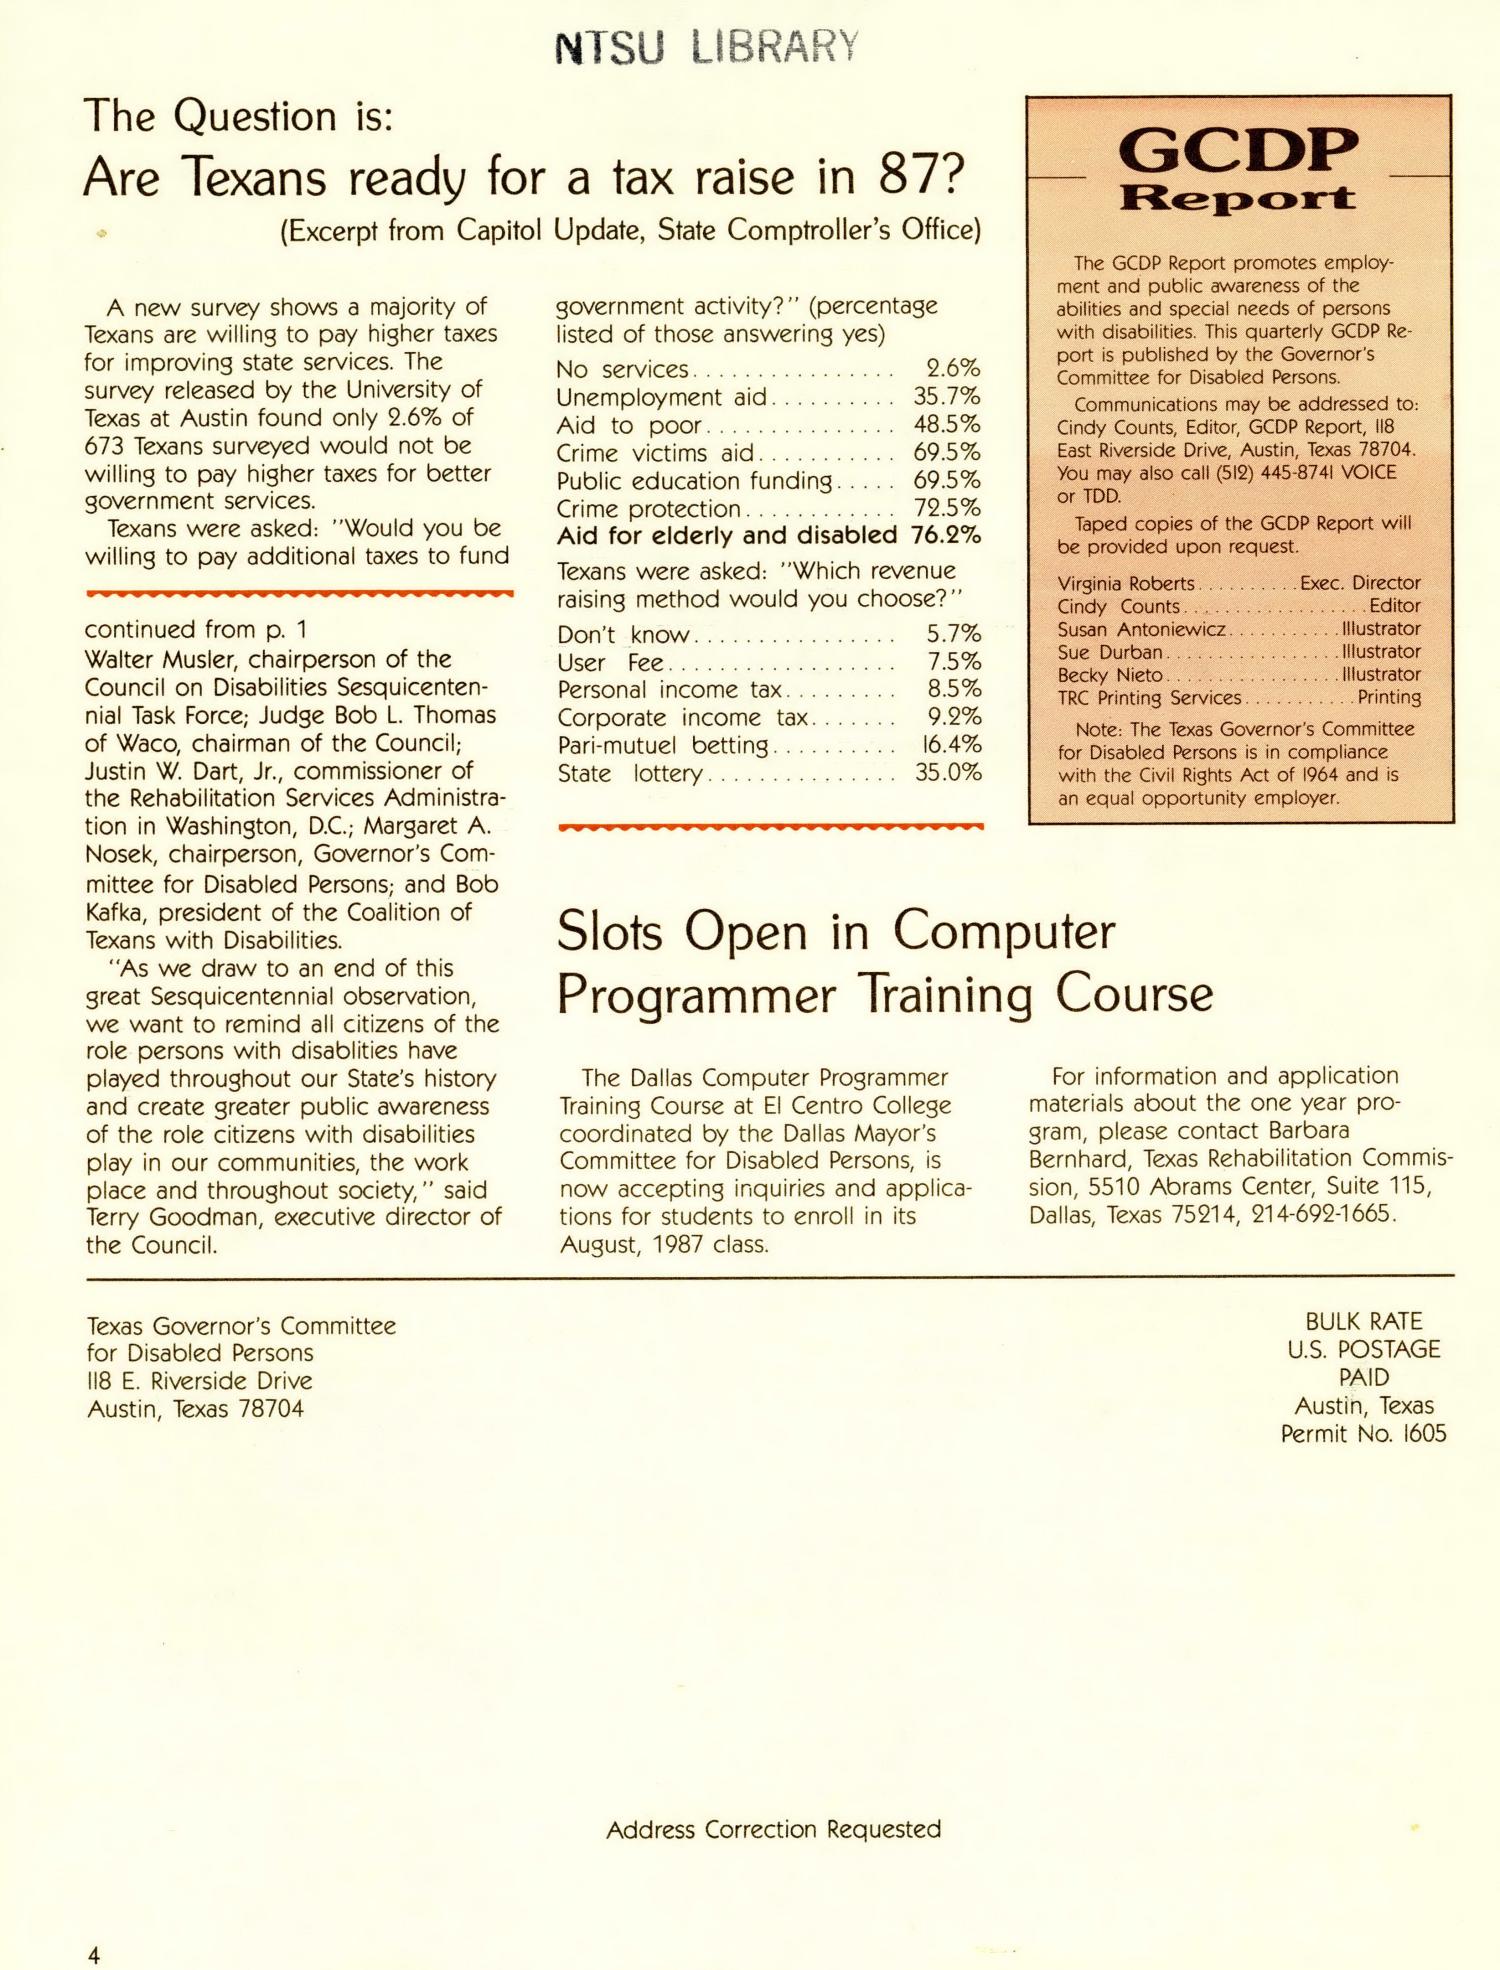 GCDP Report, Volume 87, Number 2, February 1987
                                                
                                                    Back Cover
                                                